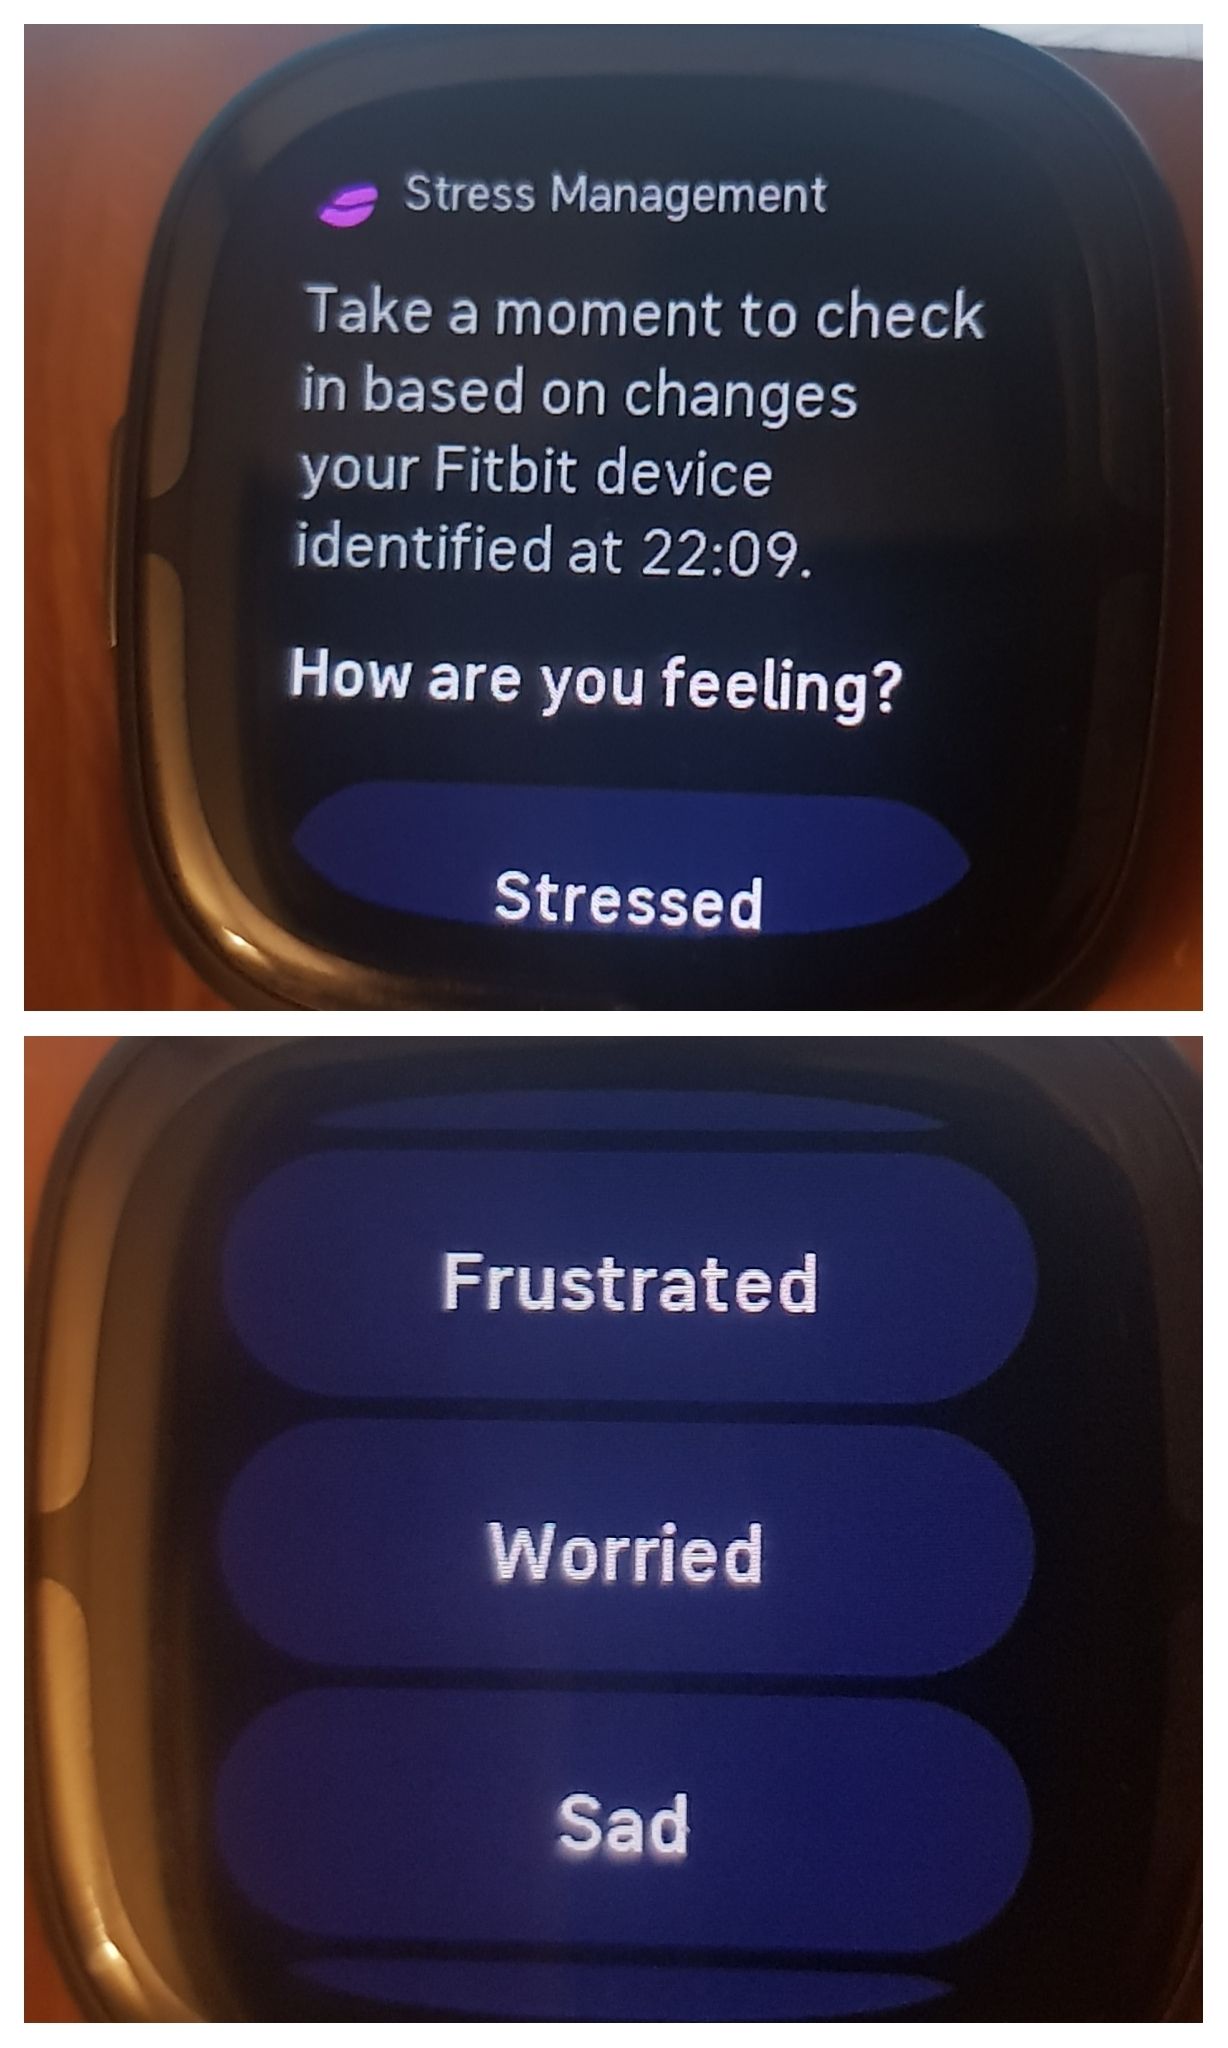 Managing Workplace Stress : r/FitbitSense